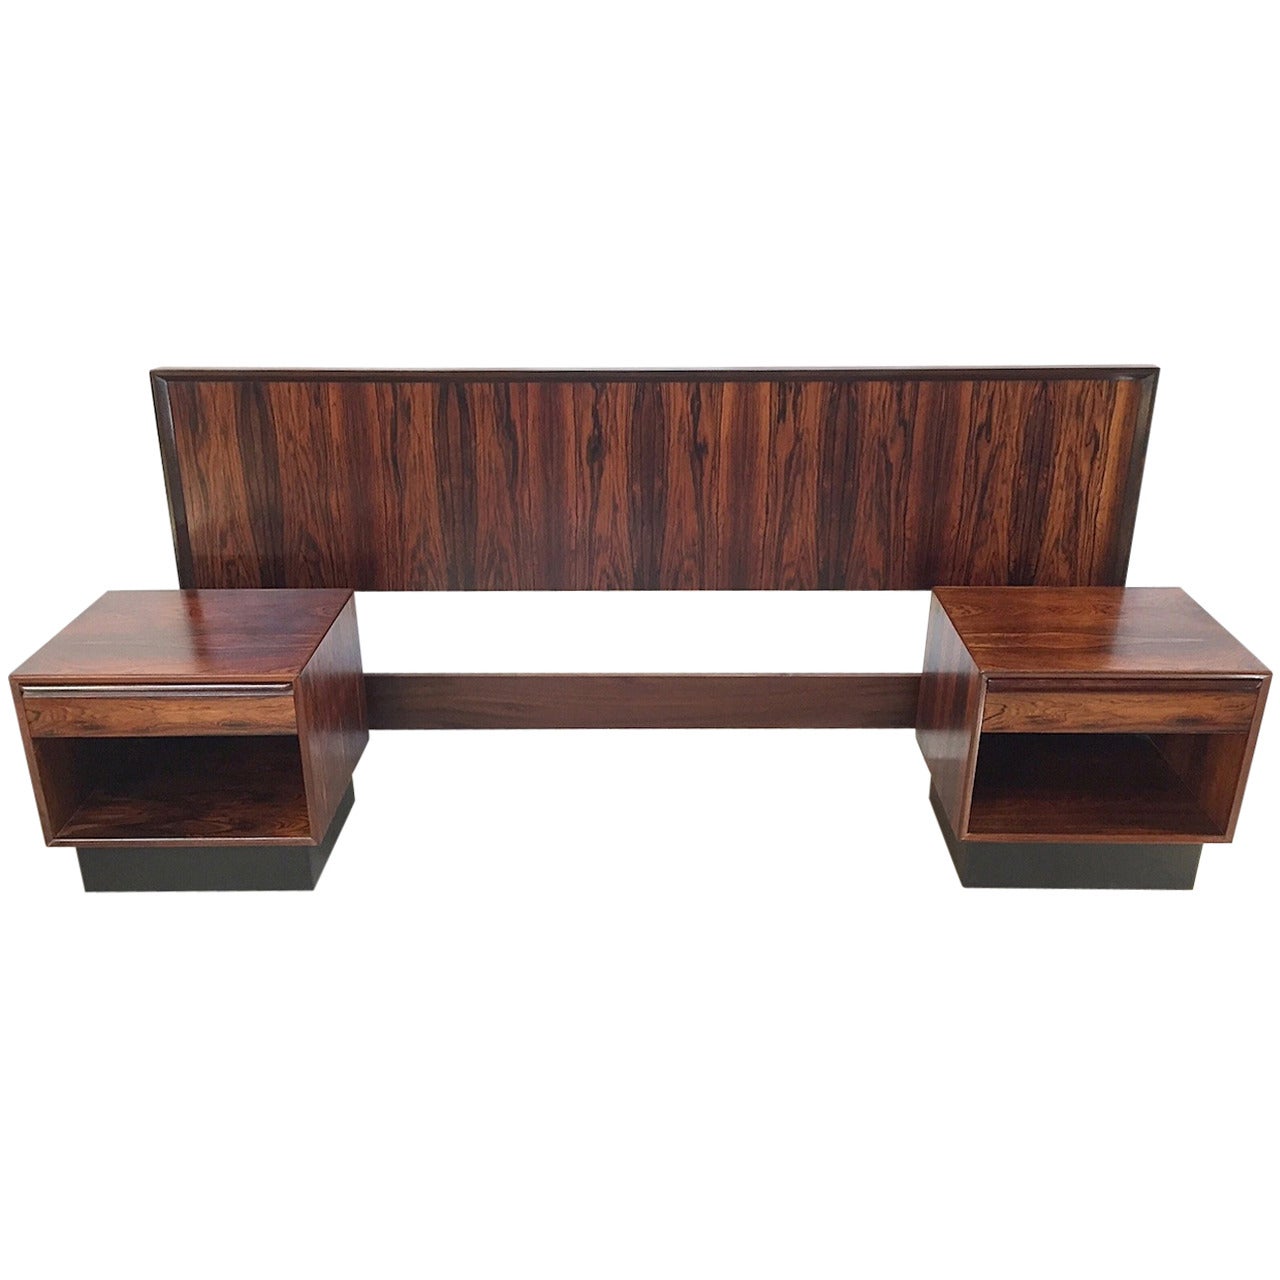 Rare Danish Modern Rosewood King Headboard with Matching Nightstands by Westnofa